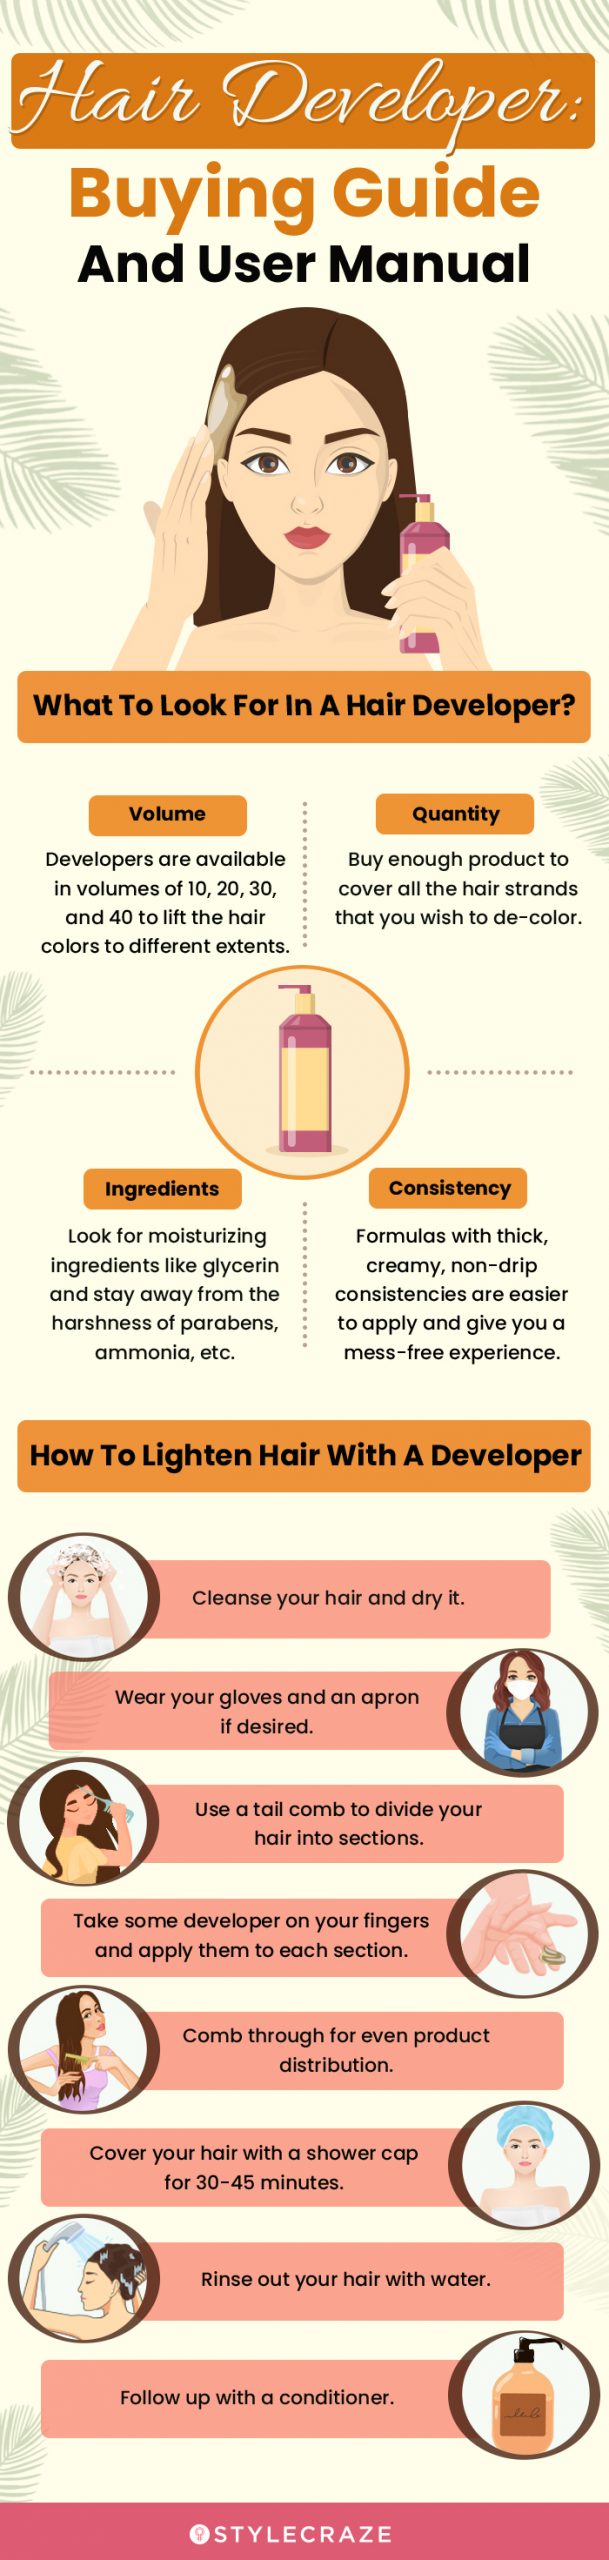 Hair Developer: Buying Guide And User Manual